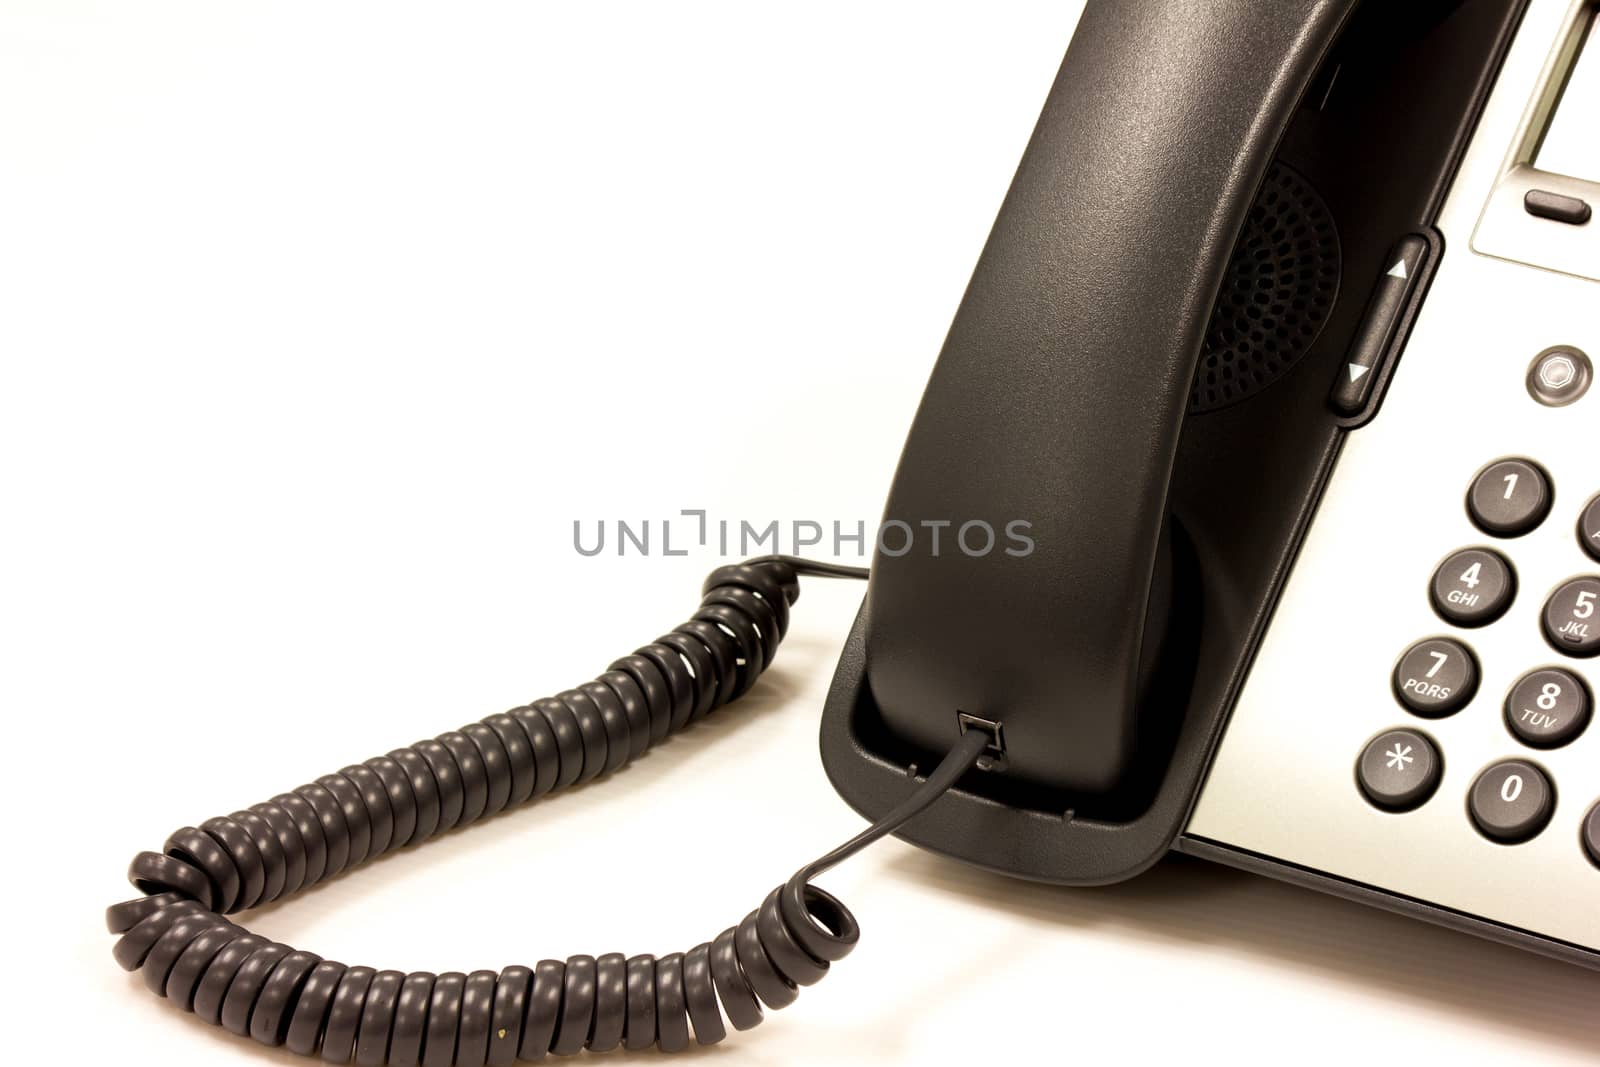 Telephone office equipment connection